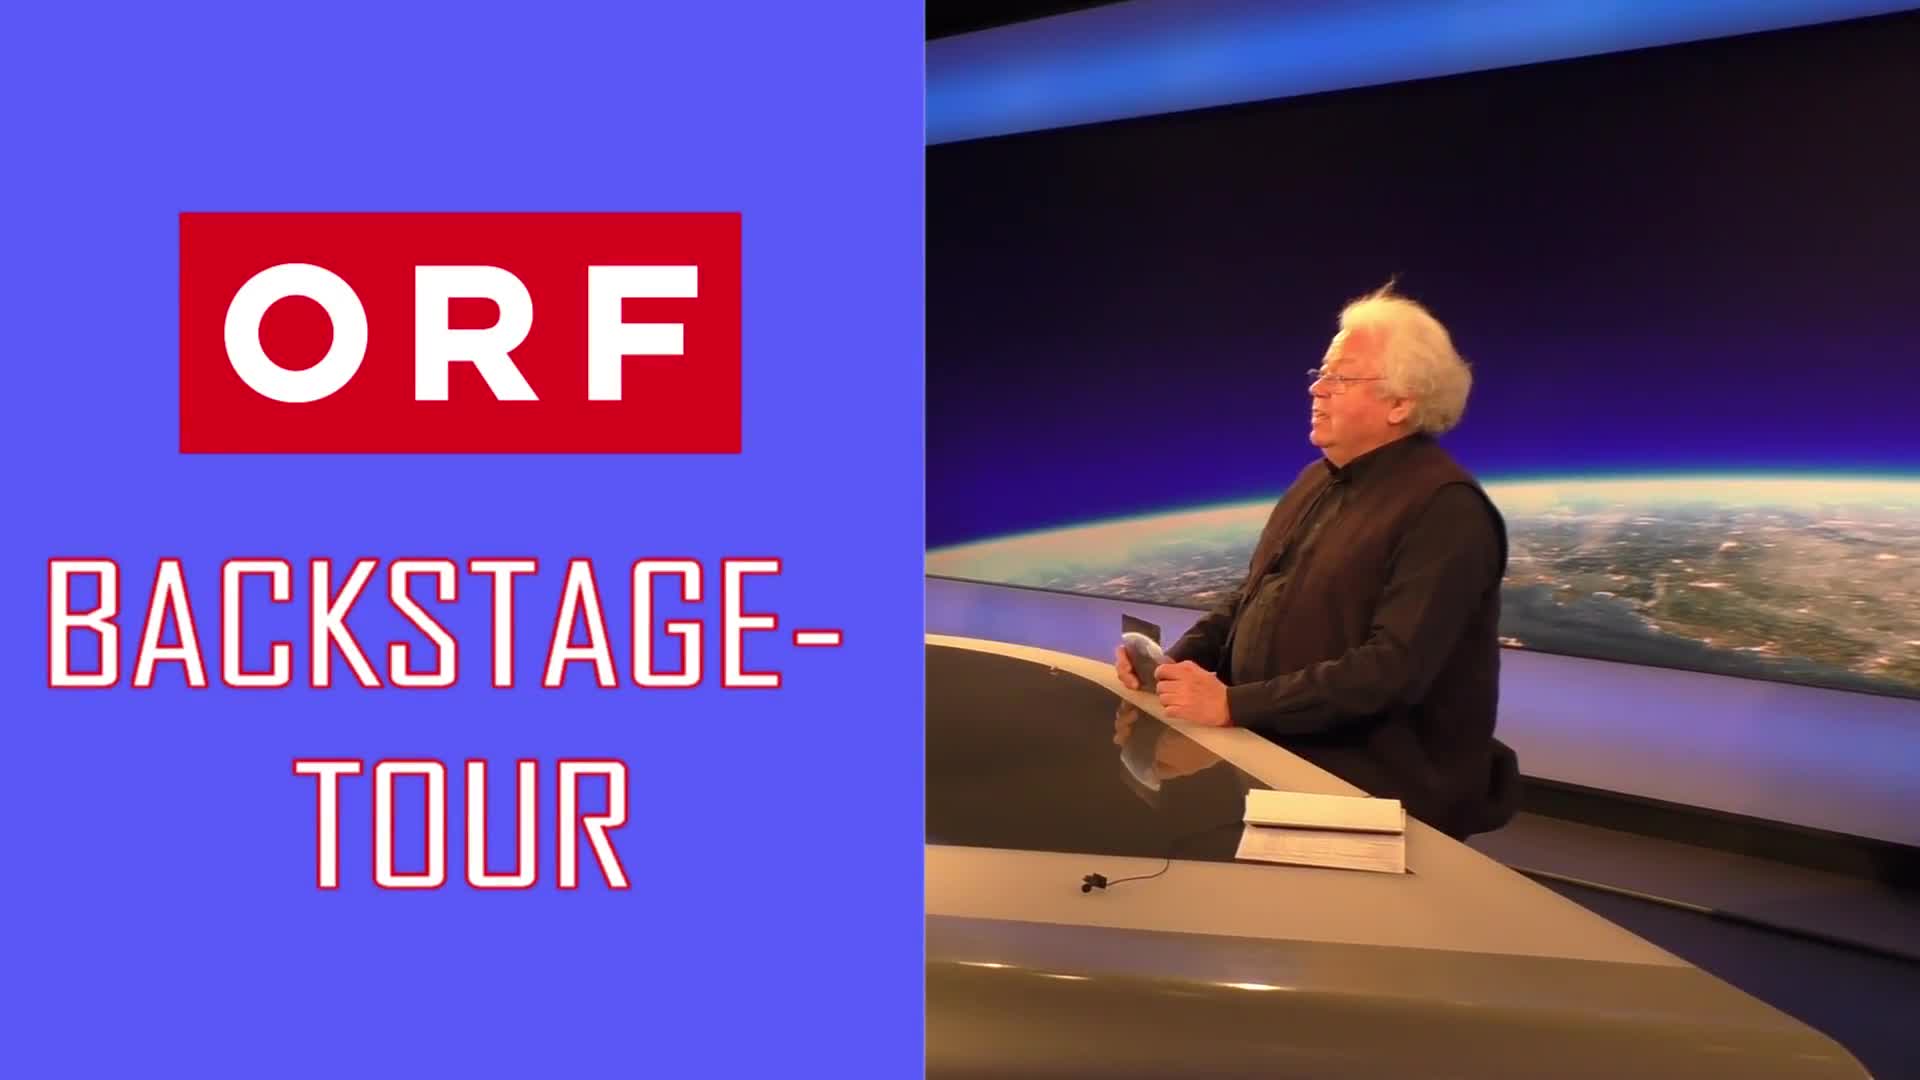 ORF Backstage - Tour